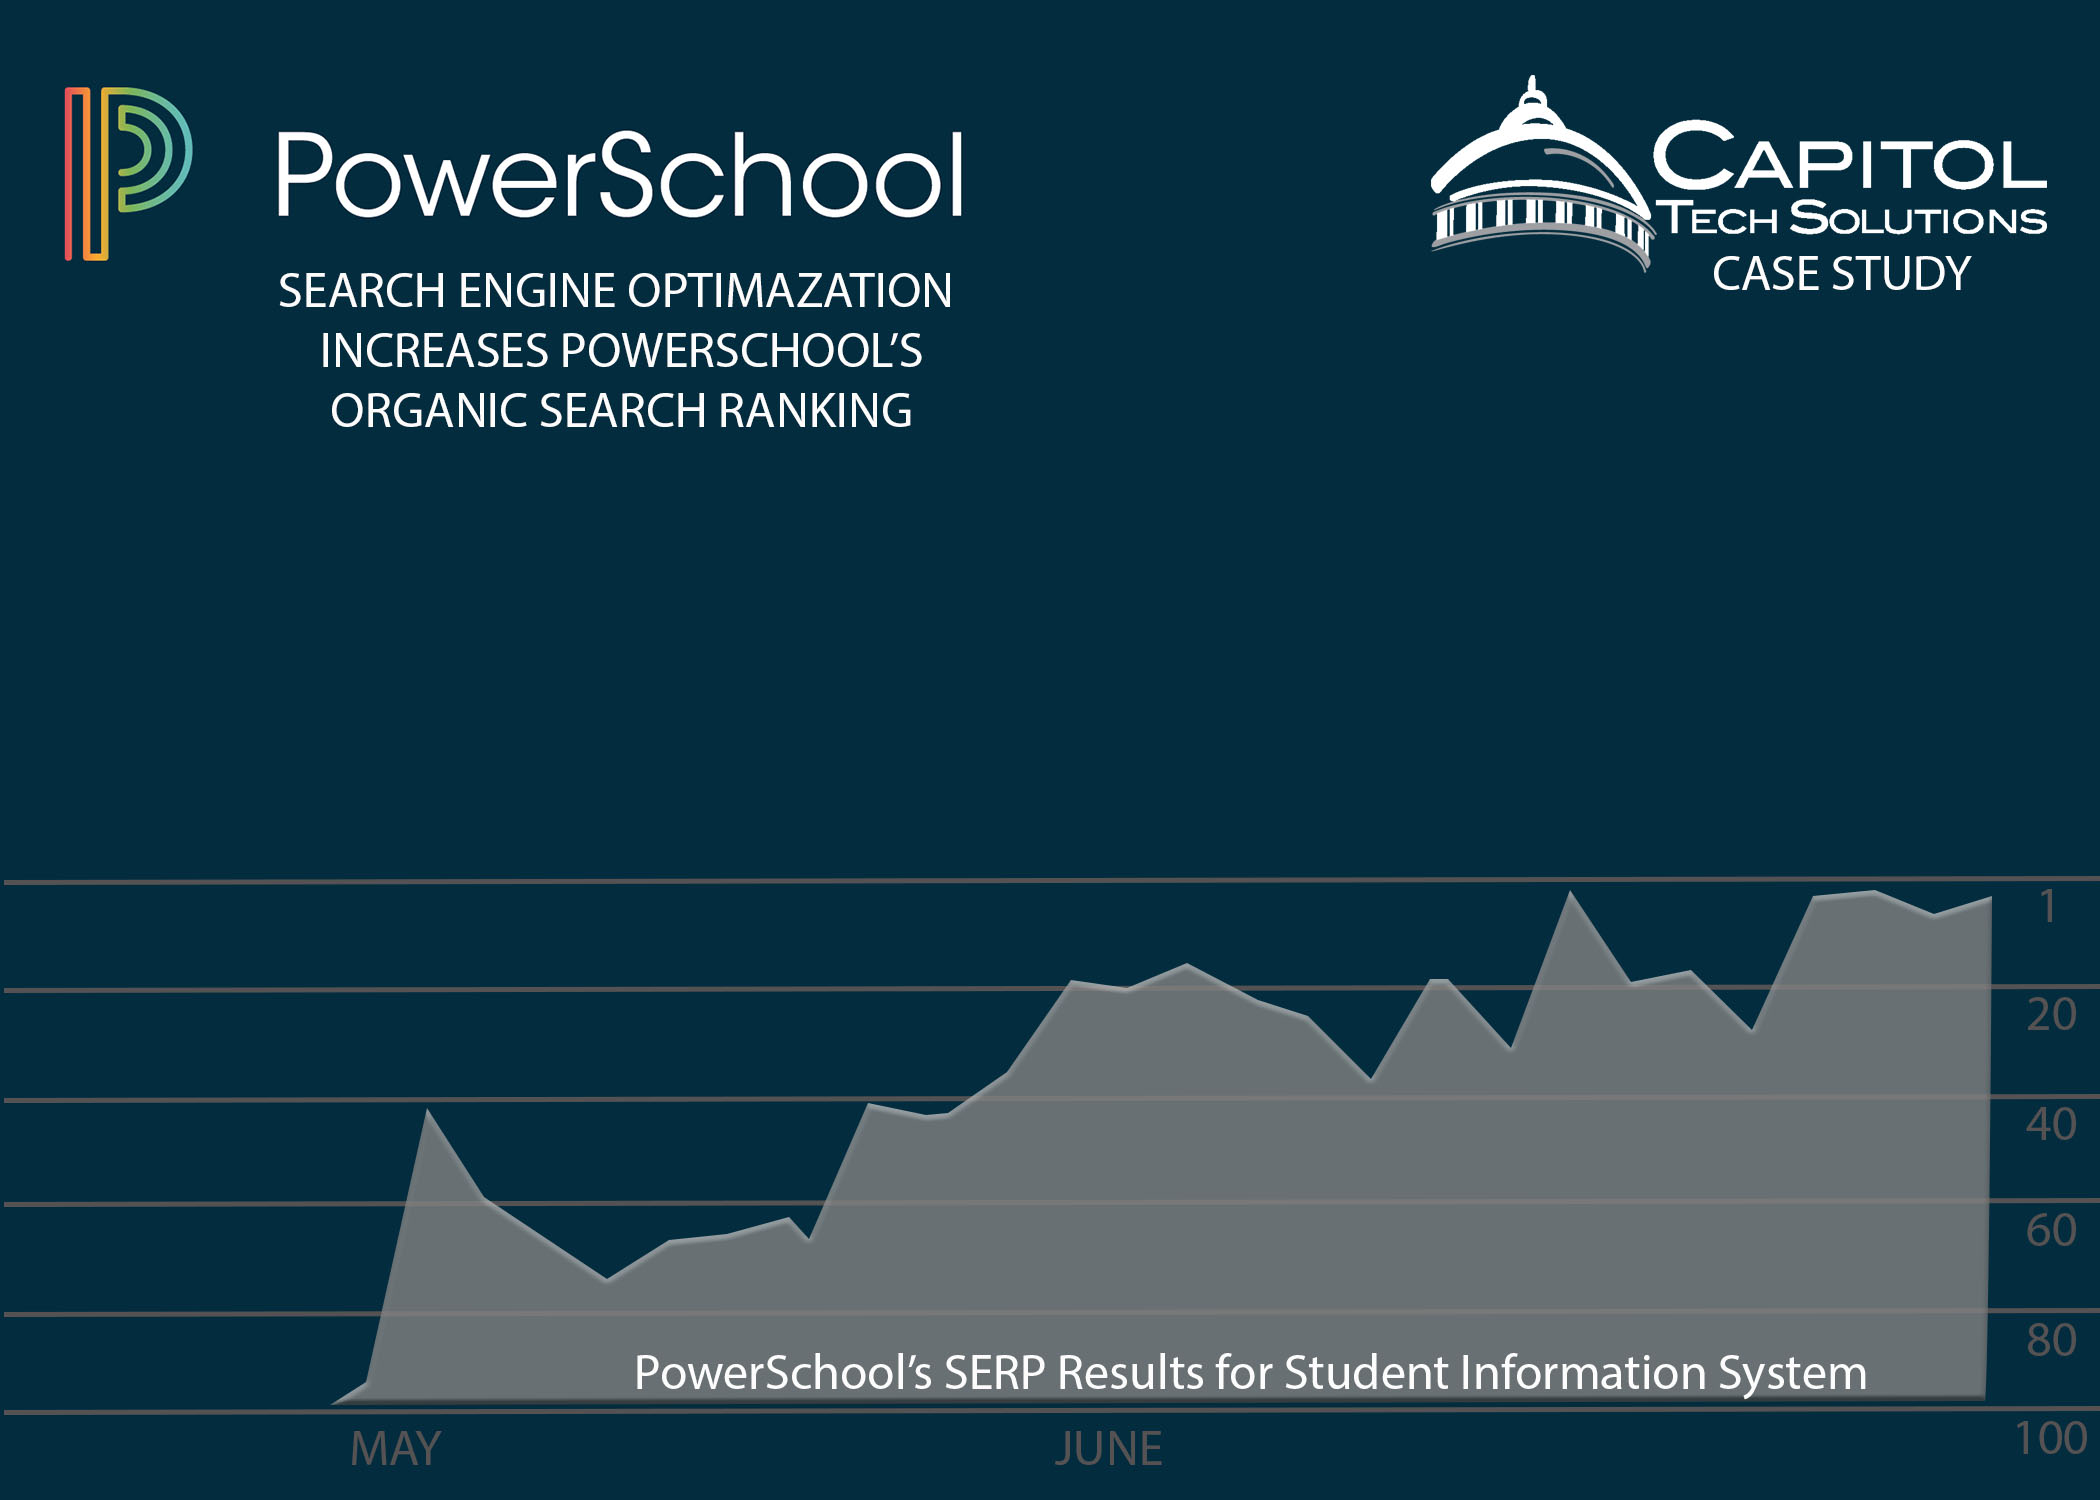 A Comprehensive Case Study of PowerSchool's Organic Search Ranking Through SEO improves from Capitol Tech Solutions